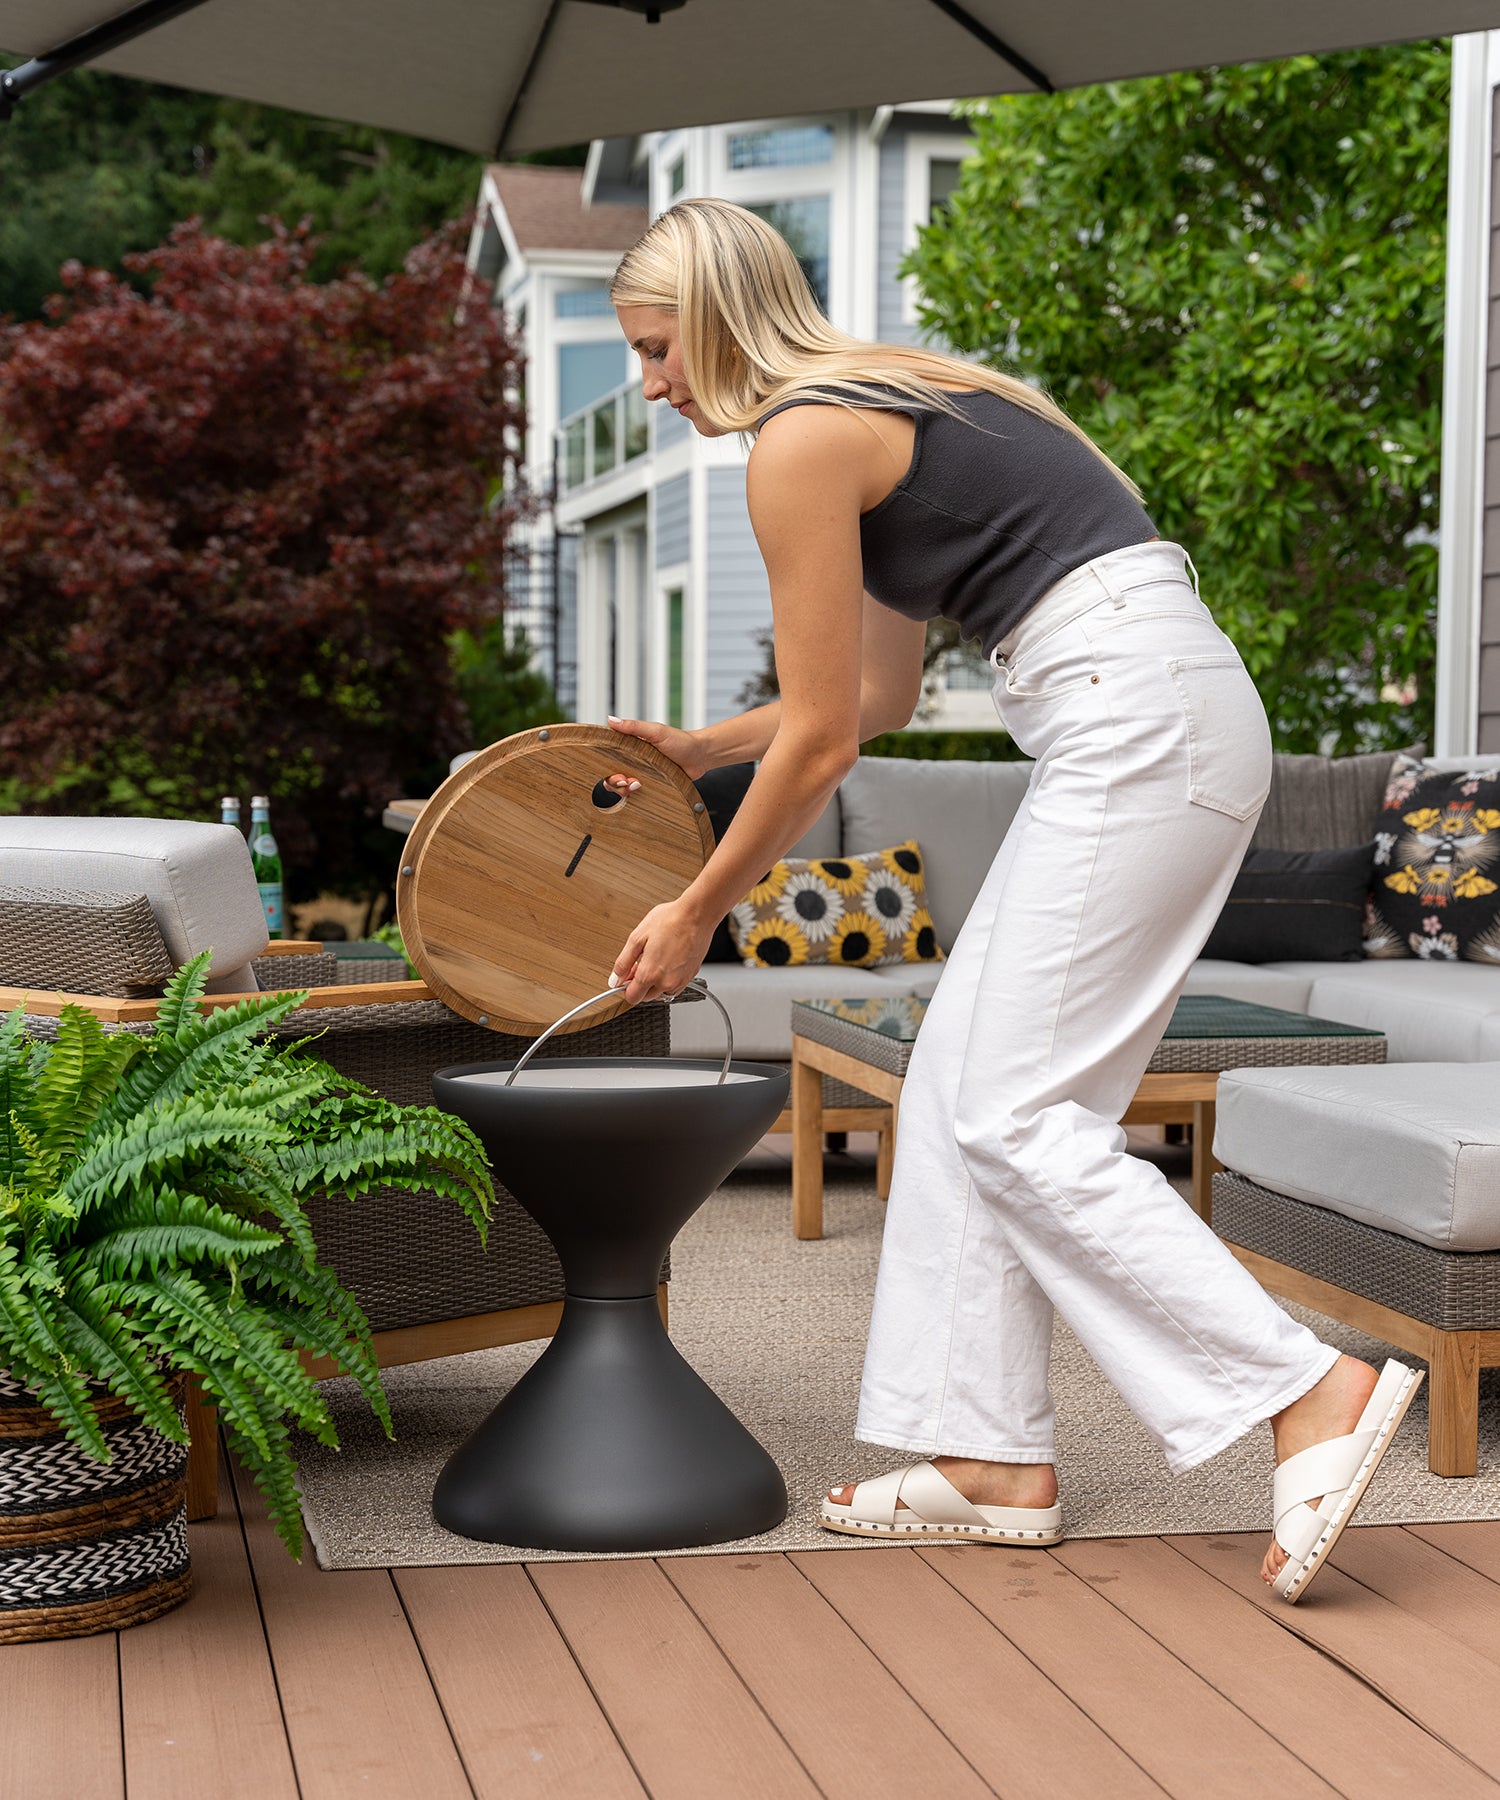 A person lifting an ice bucket out of an outdoor side table on a porch